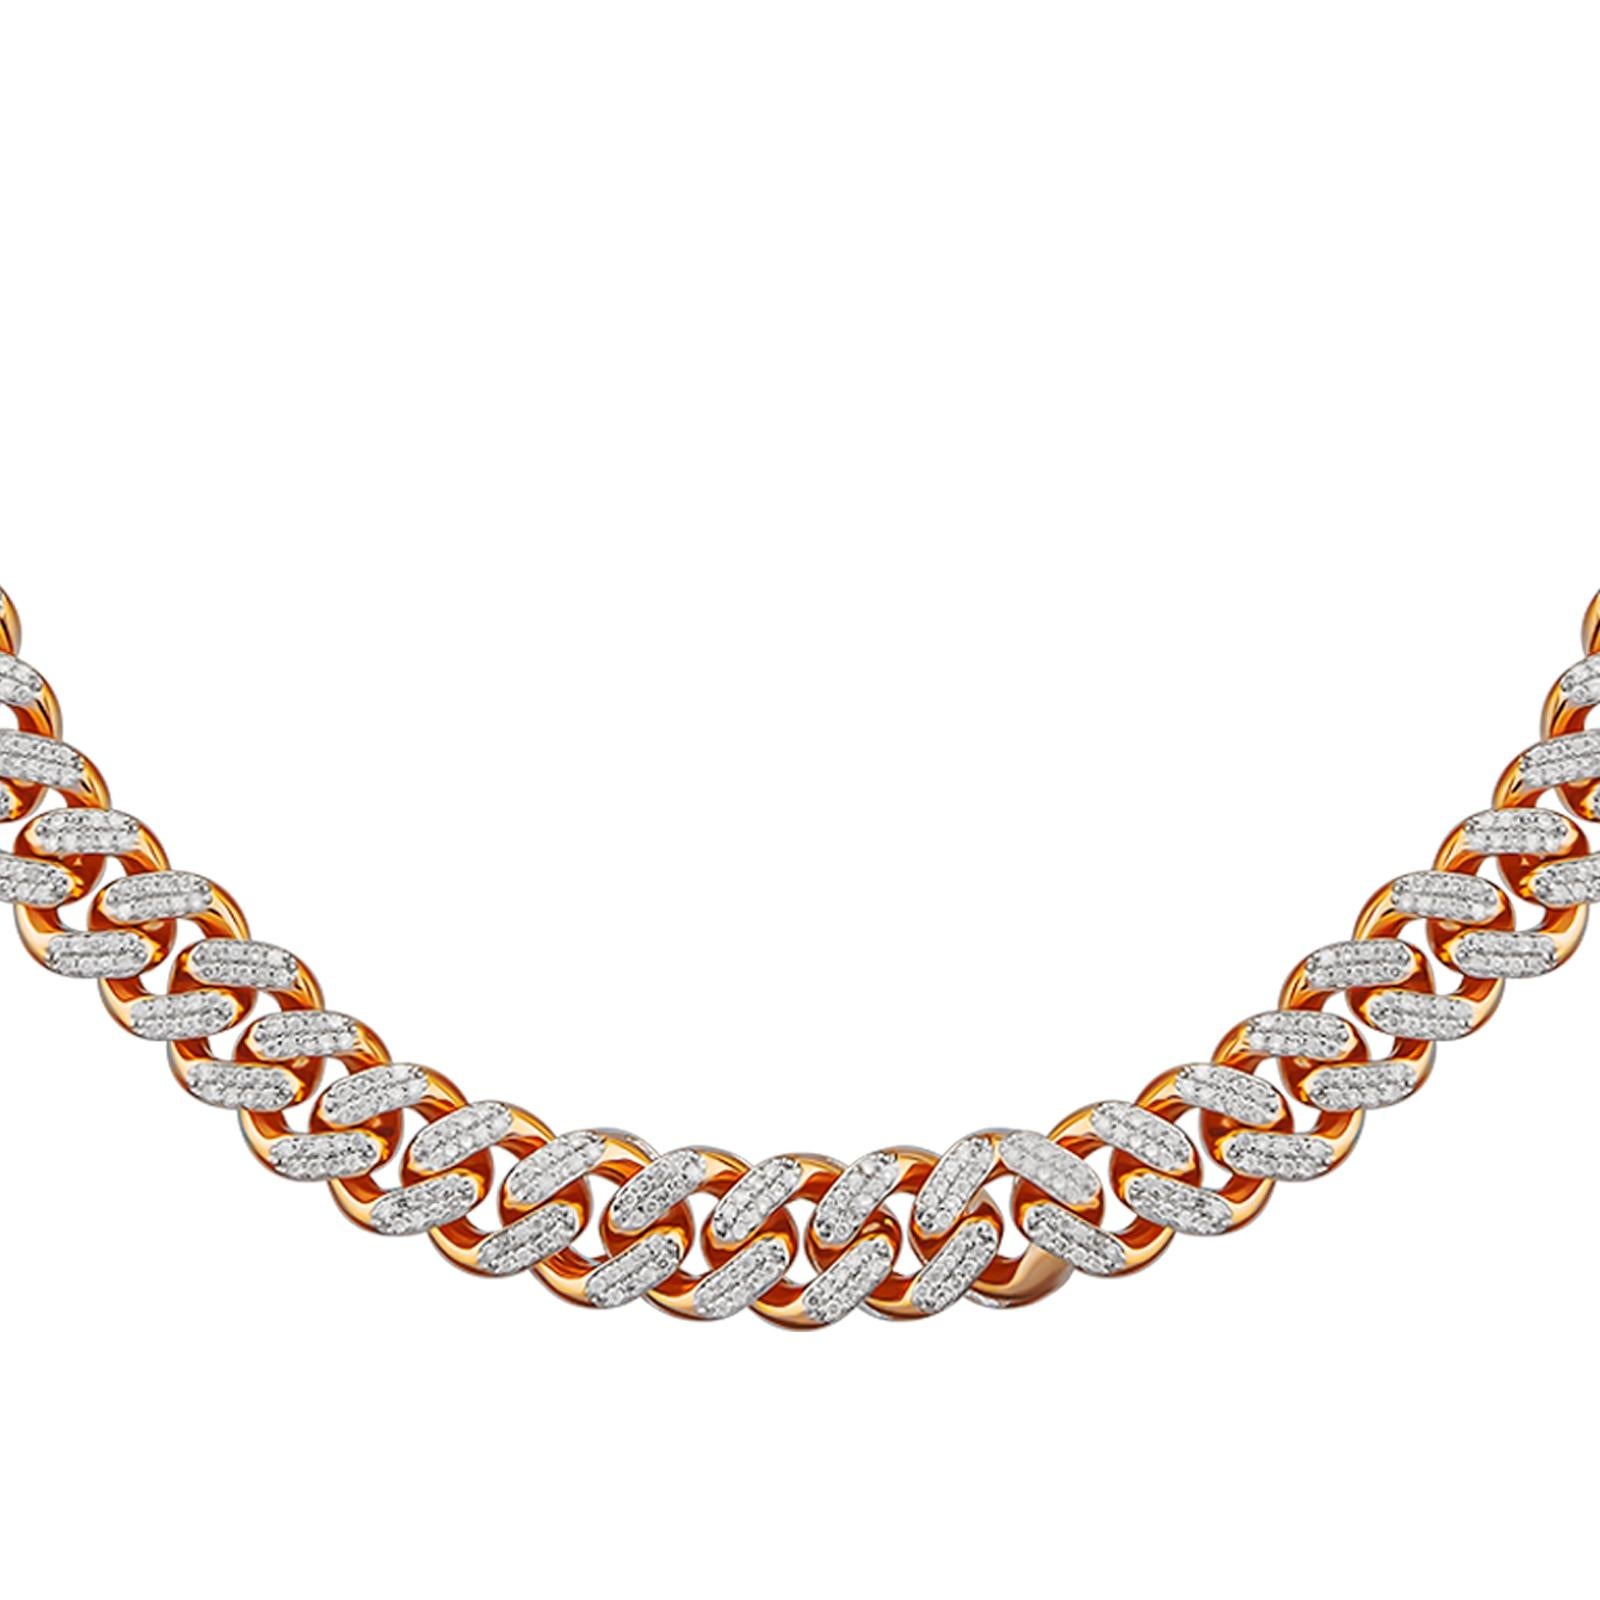 6 Carat Pave Diamond Link Necklace 18K Gold In New Condition For Sale In New York, NY